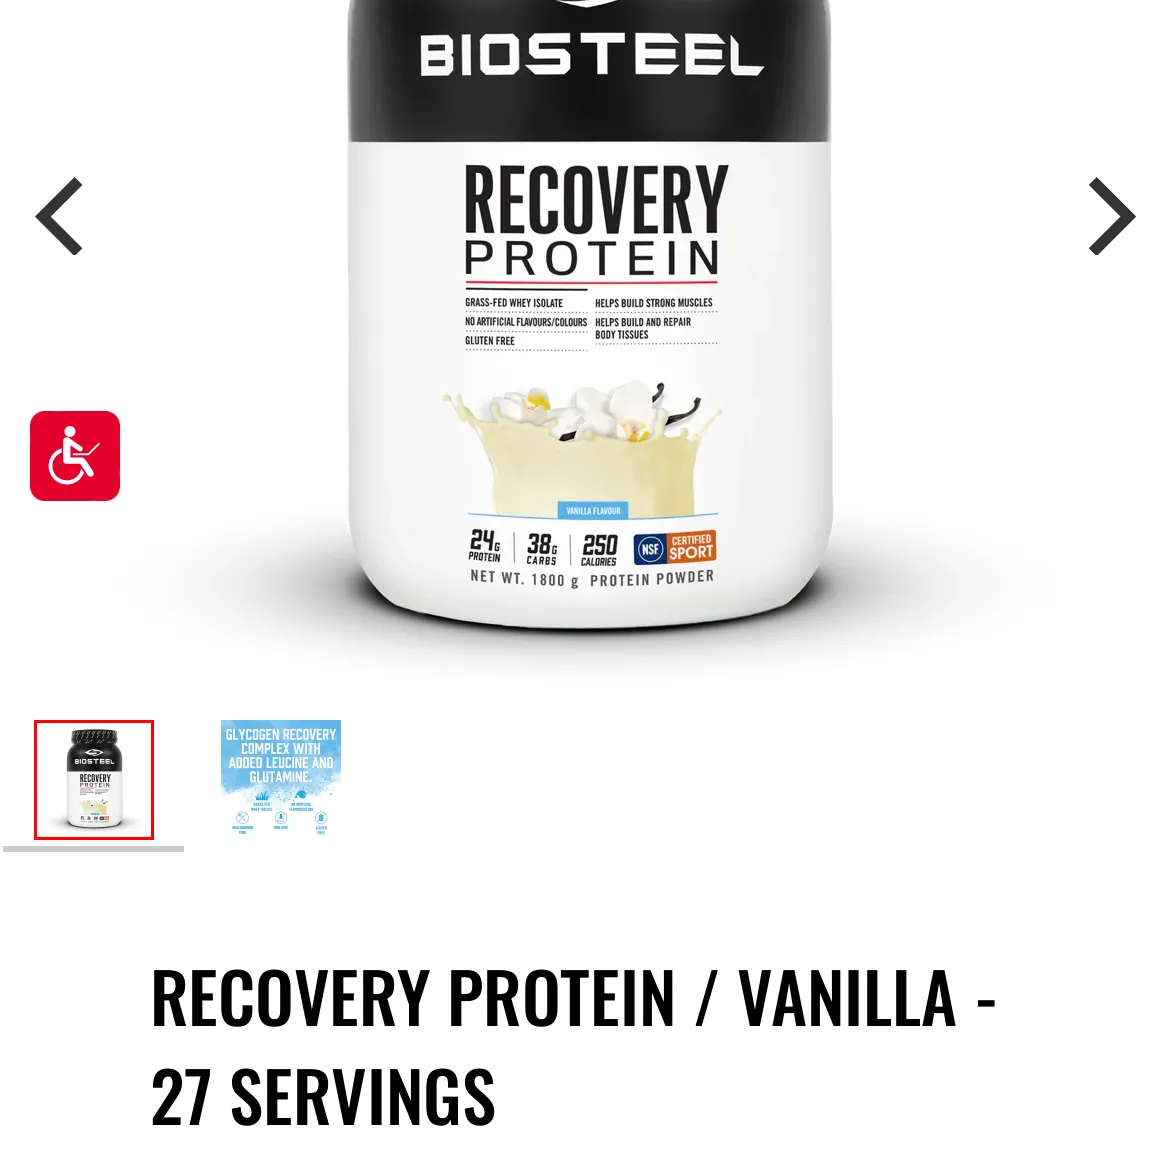 Biosteel recovery protein  photo 1